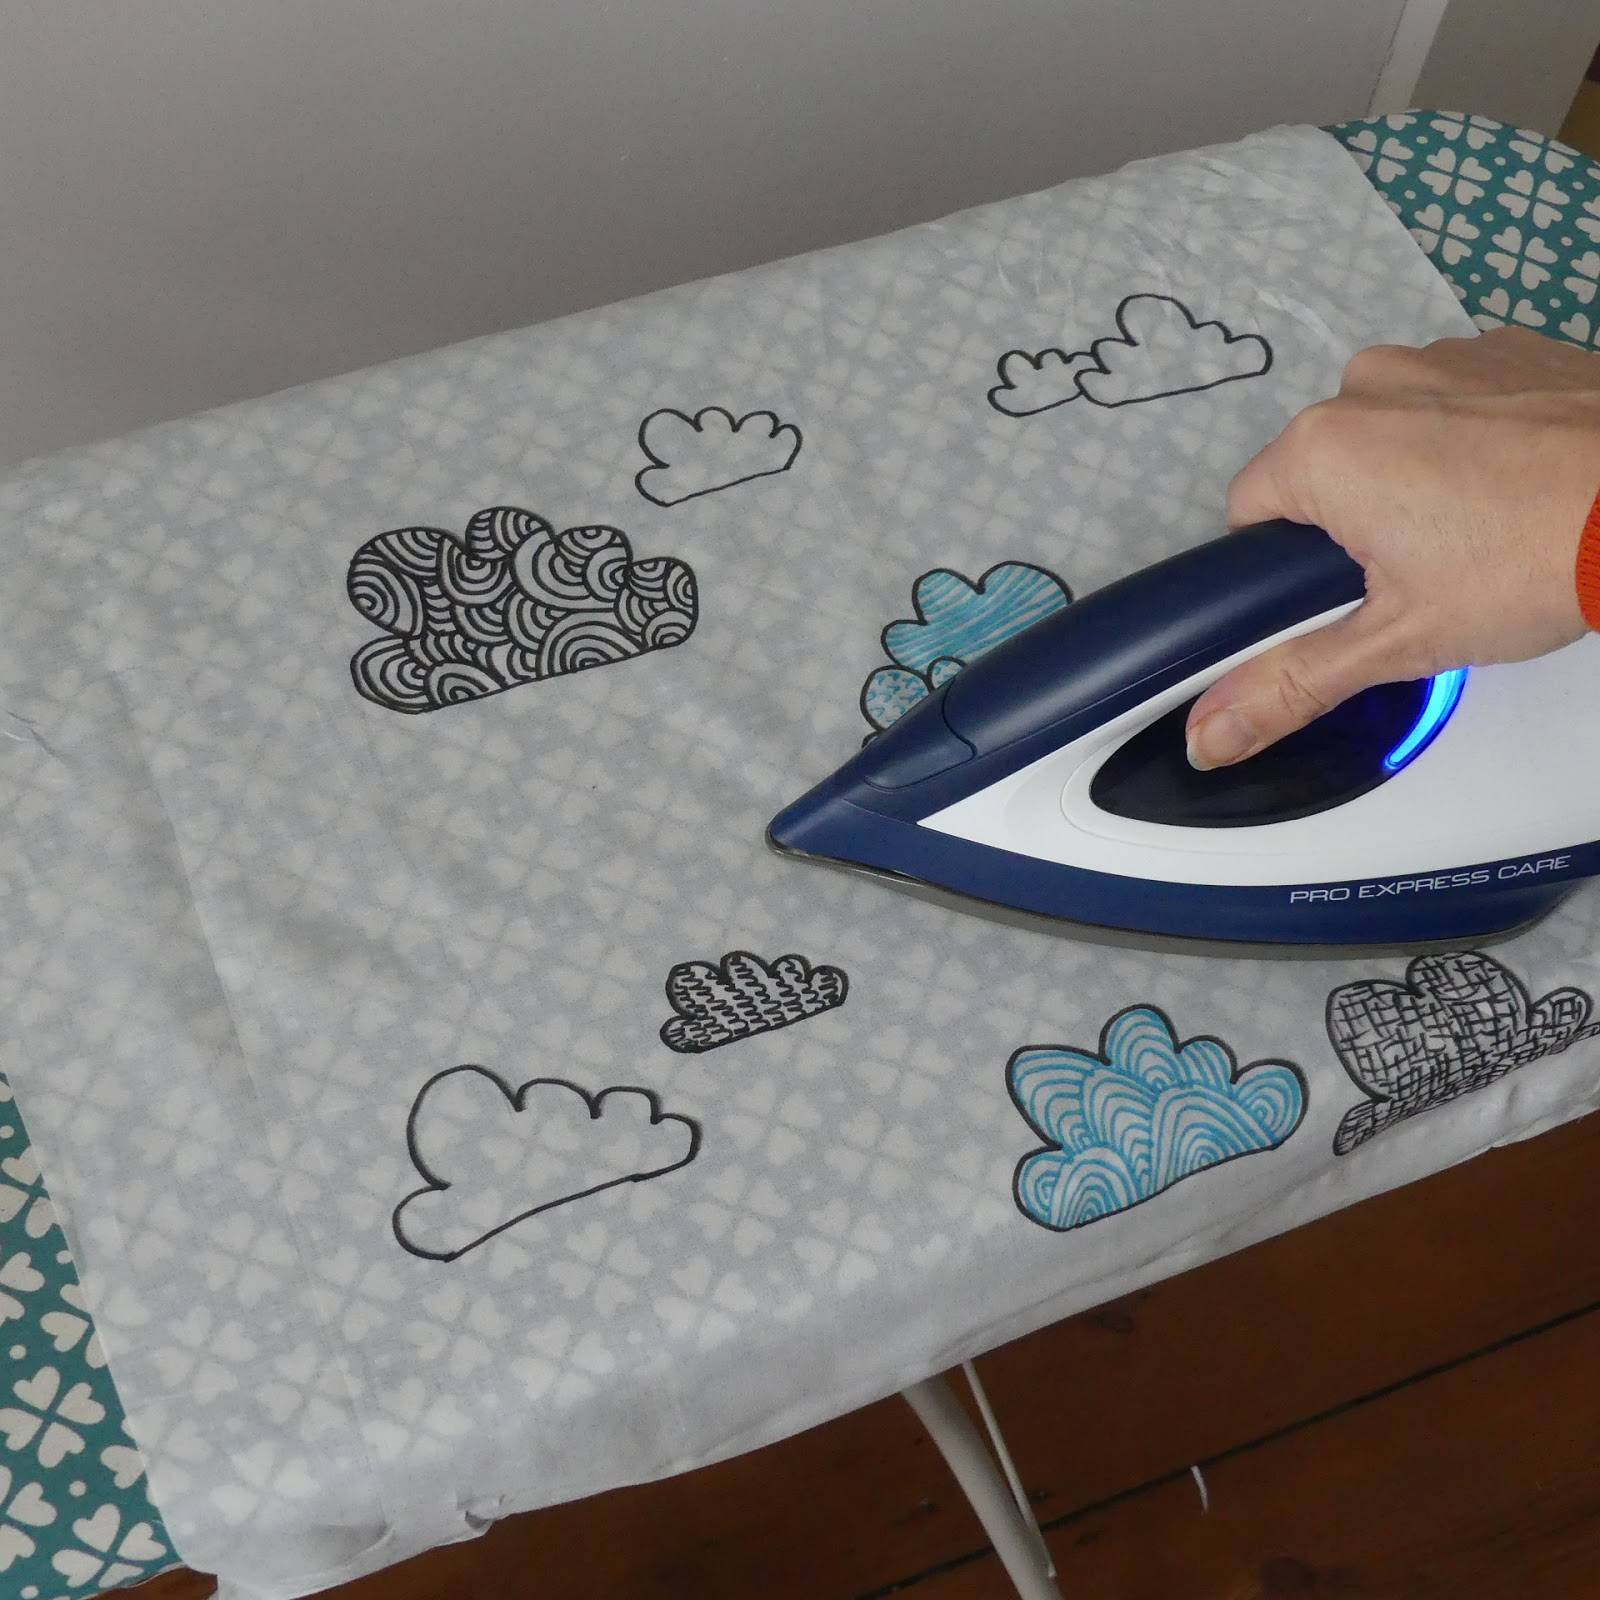 ironing the cloudy fabric design onto white fabric